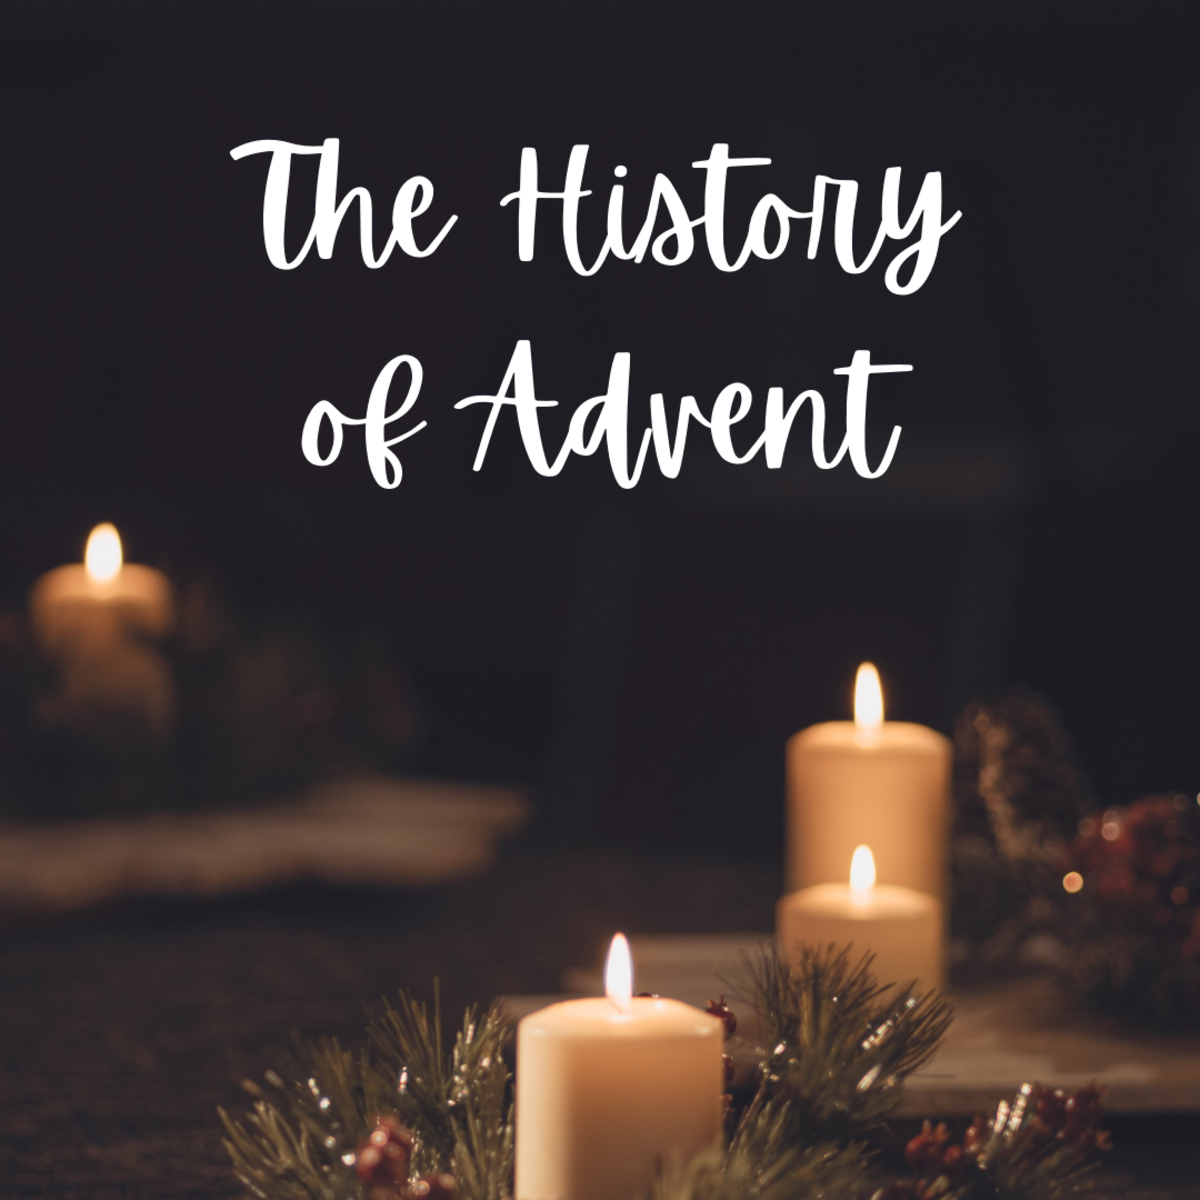 The History of Christmas Traditions: Advent